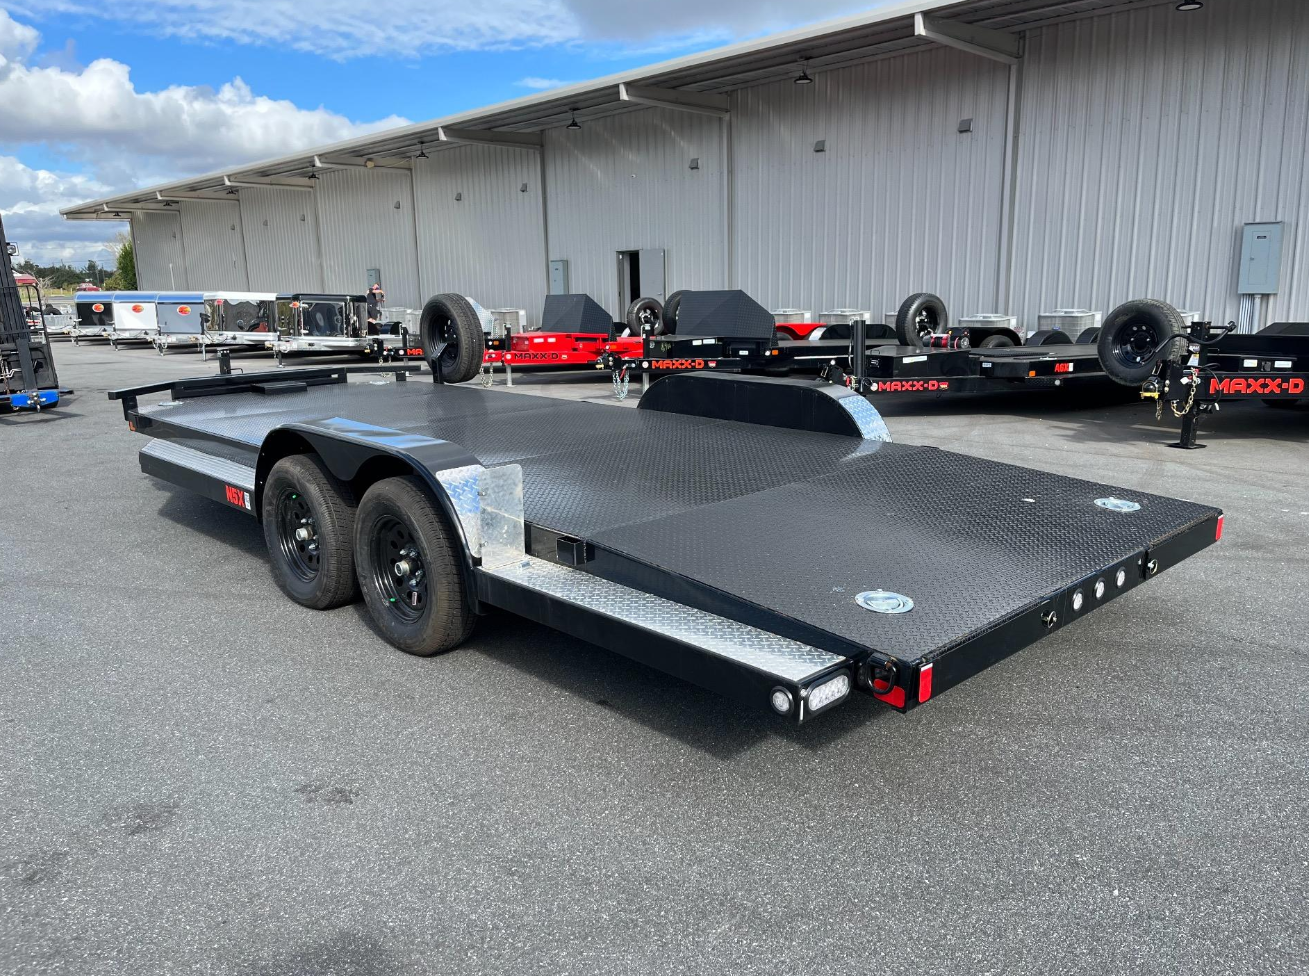 Discover Quality and Reliable 83x20 Car Hauler Today!